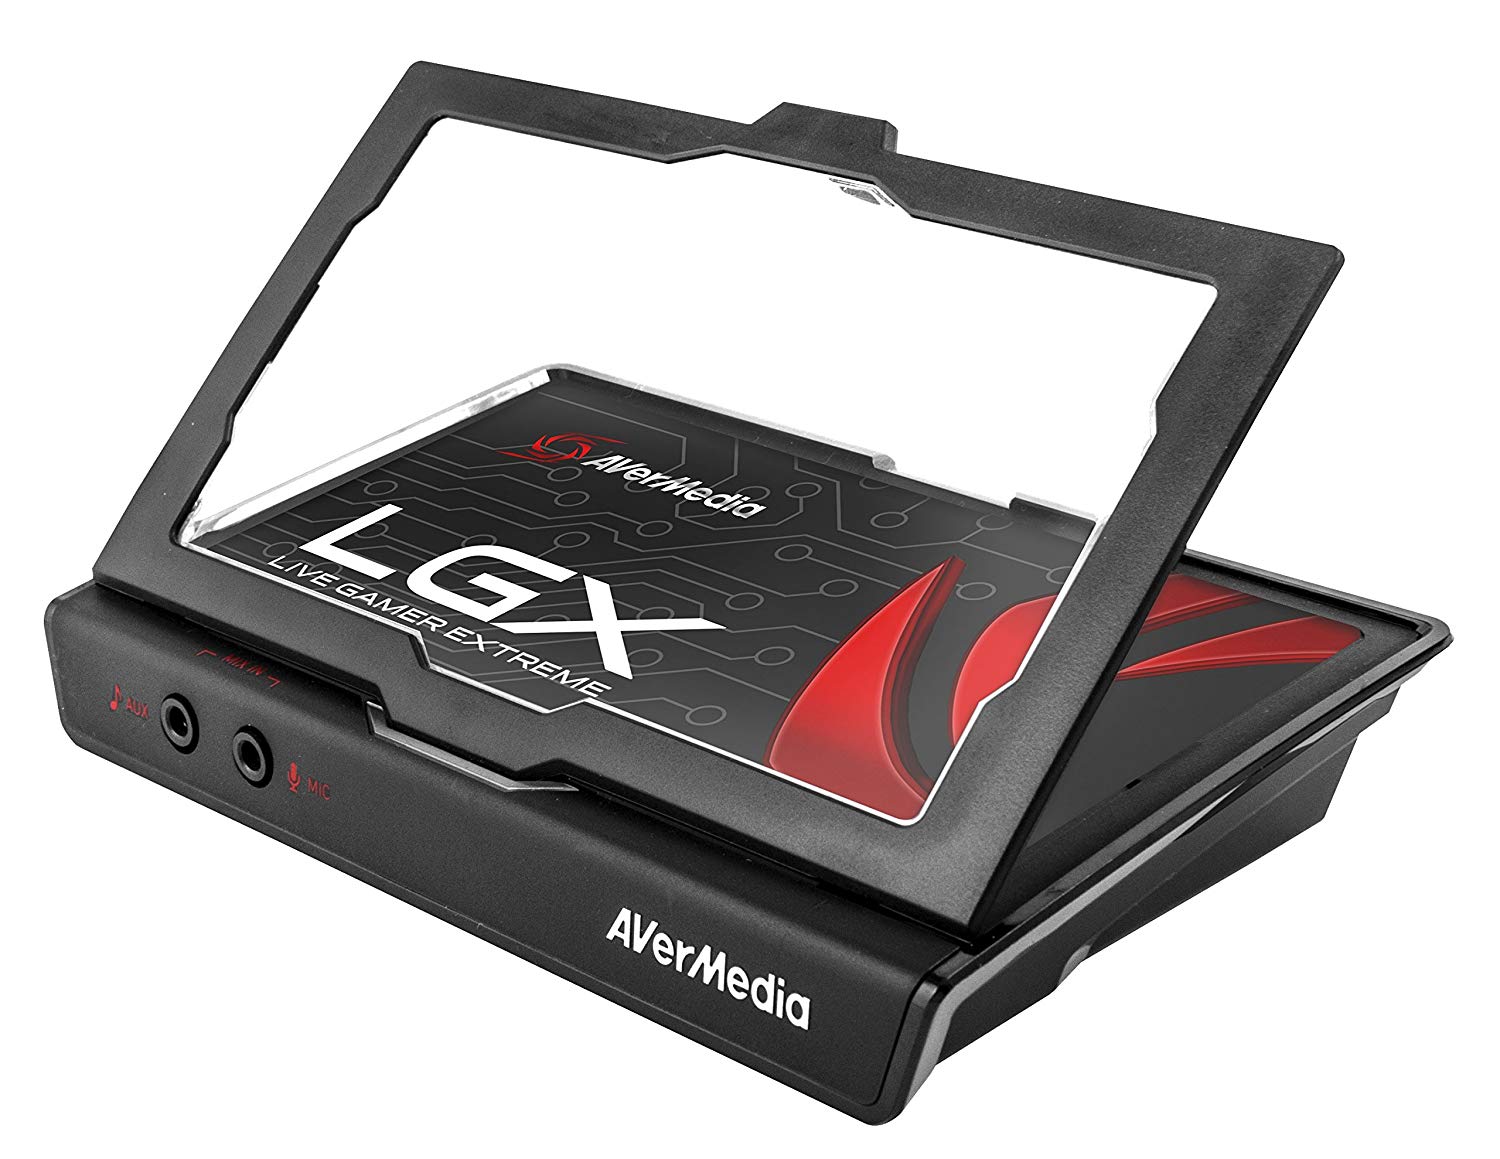 AVerMedia GC550 Live Gamer Extreme, USB3.0 Game Streaming and